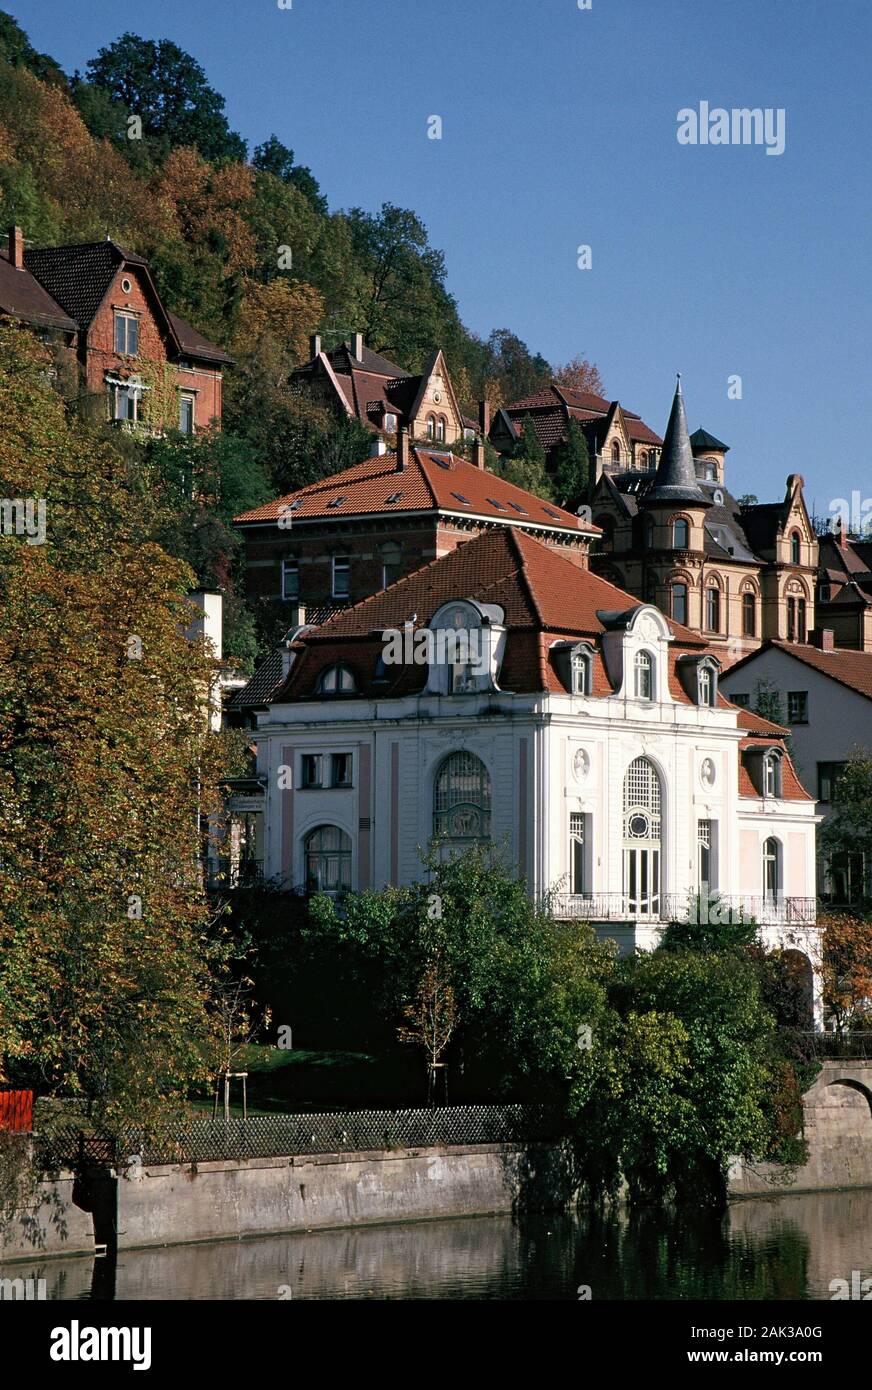 Idyllic situated at the Neckar river is the Old Swabian House in Tübingen. It was built in the style of the French rococo in 1899 and hosts nowadays t Stock Photo